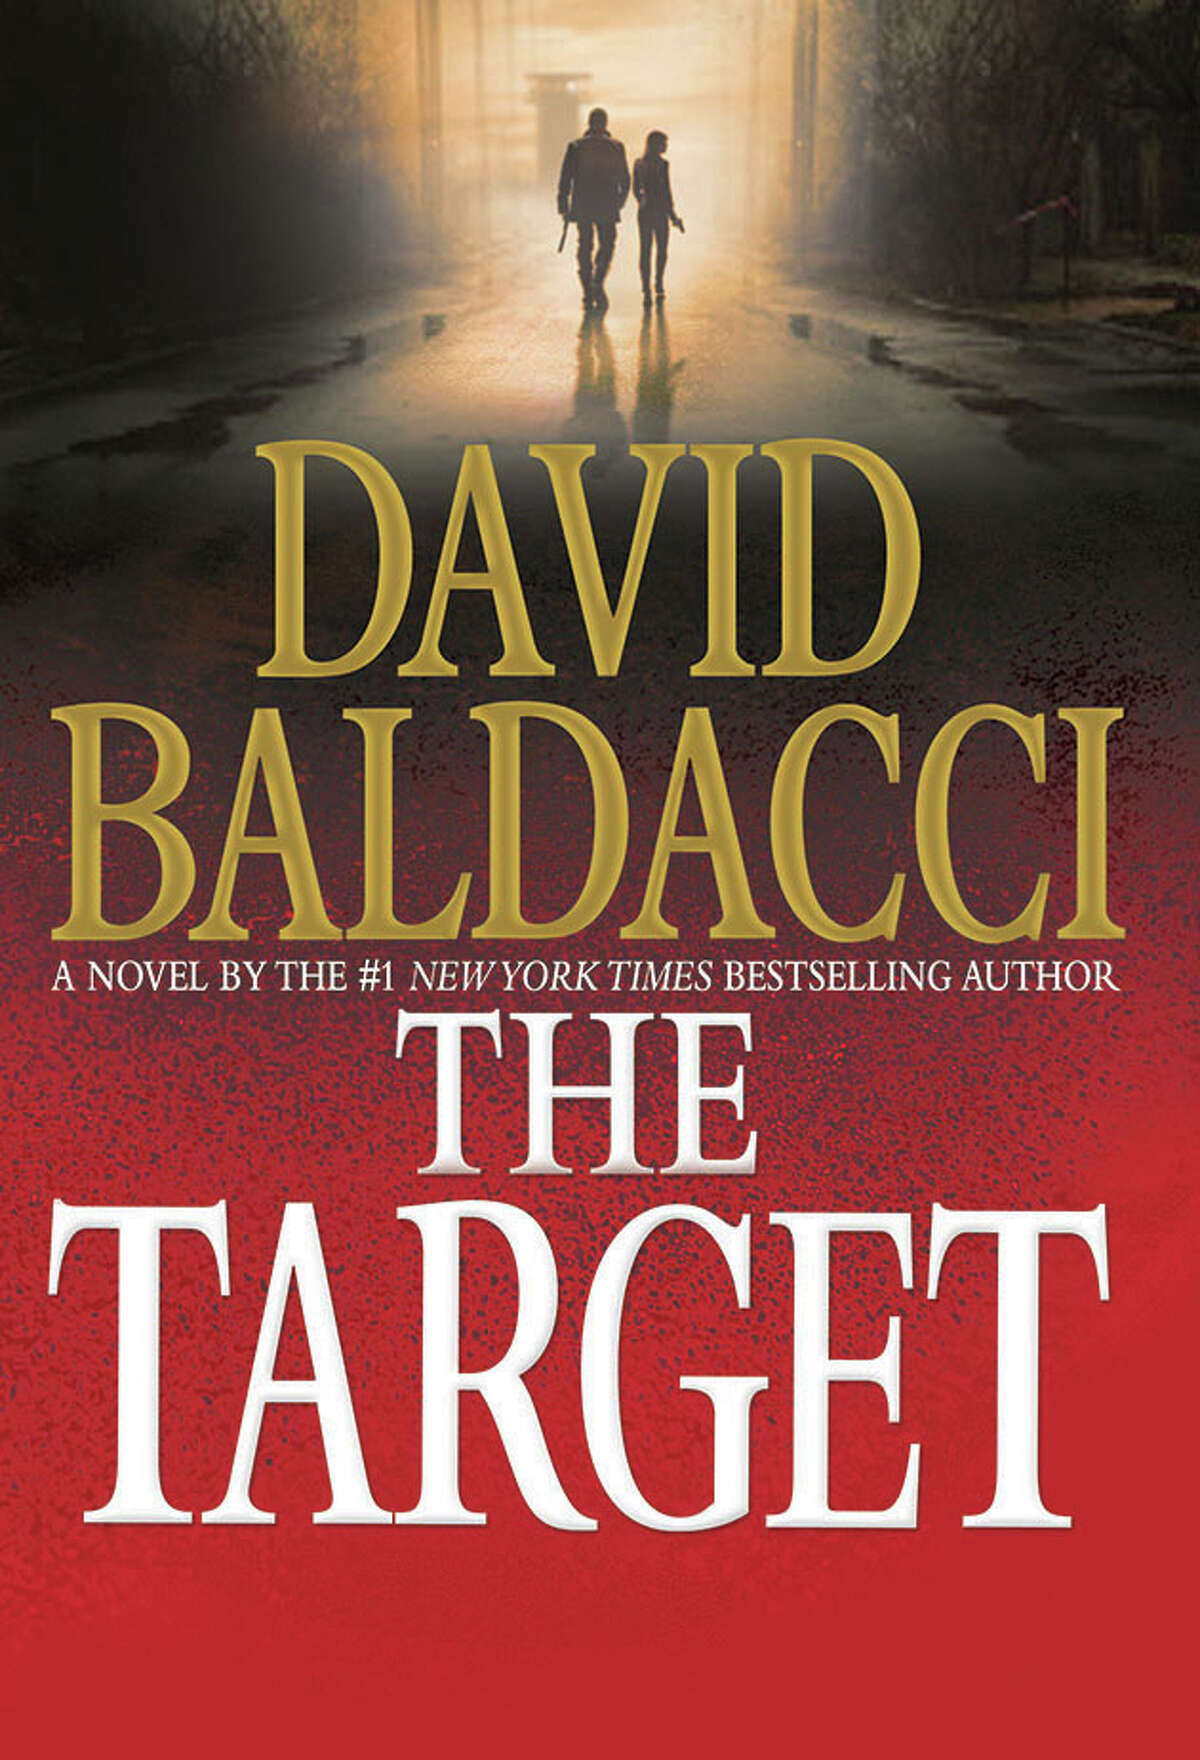 This book cover image released by Grand Central Publishing shows "The Target," by David Baldacci. (AP Photo/Grand Central Publishing)